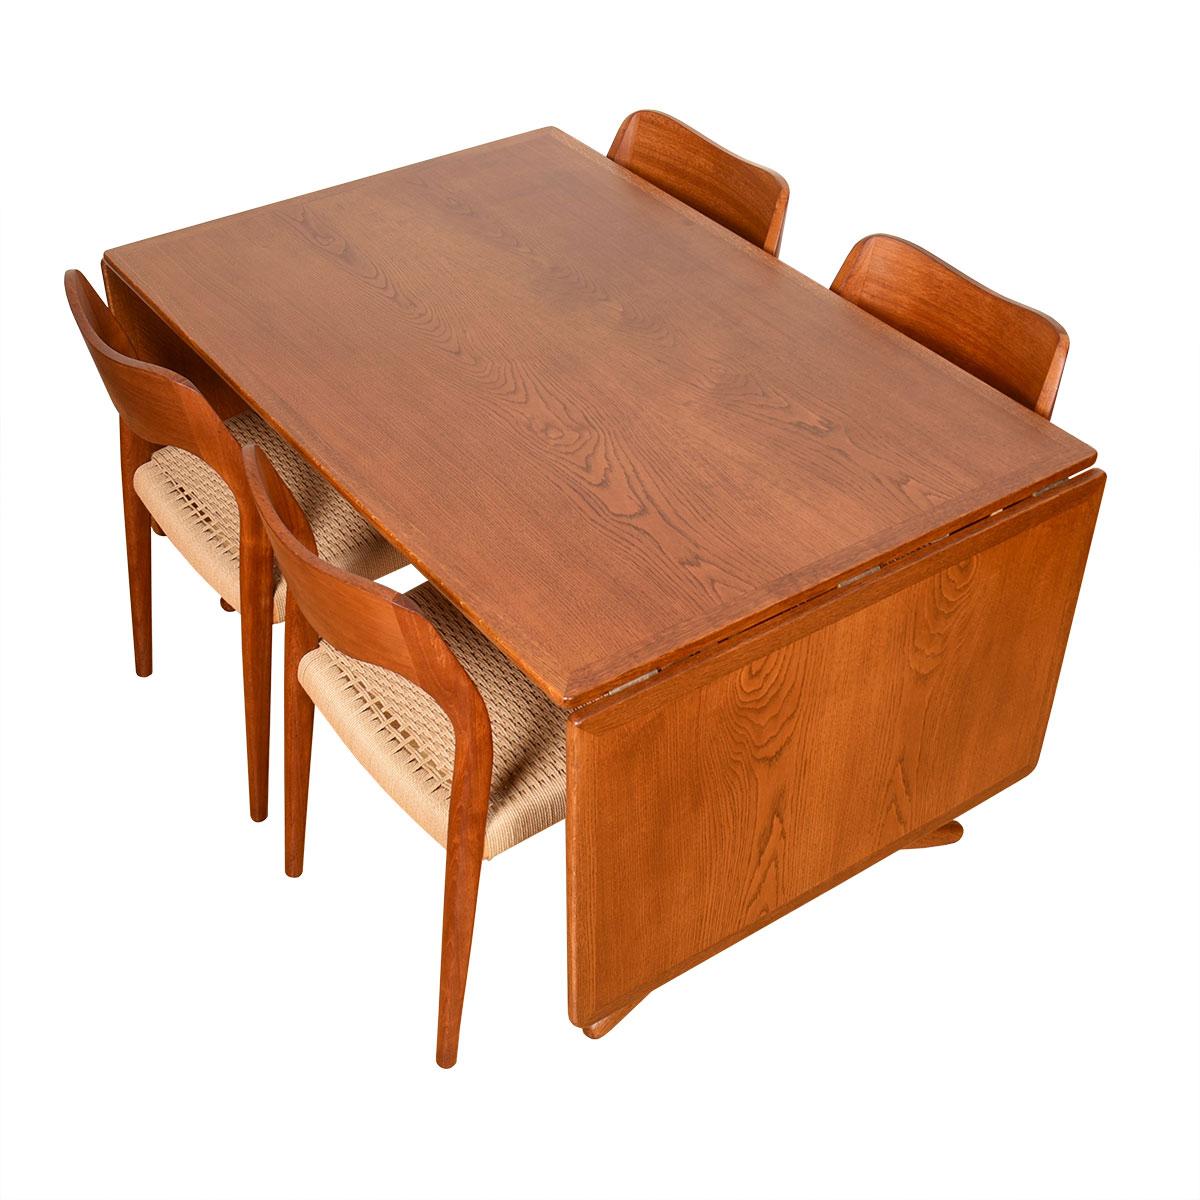 Mid-Century Modern “Saw Horse” Extendable Dining Table in Oak by Hans Wegner, 1950s For Sale